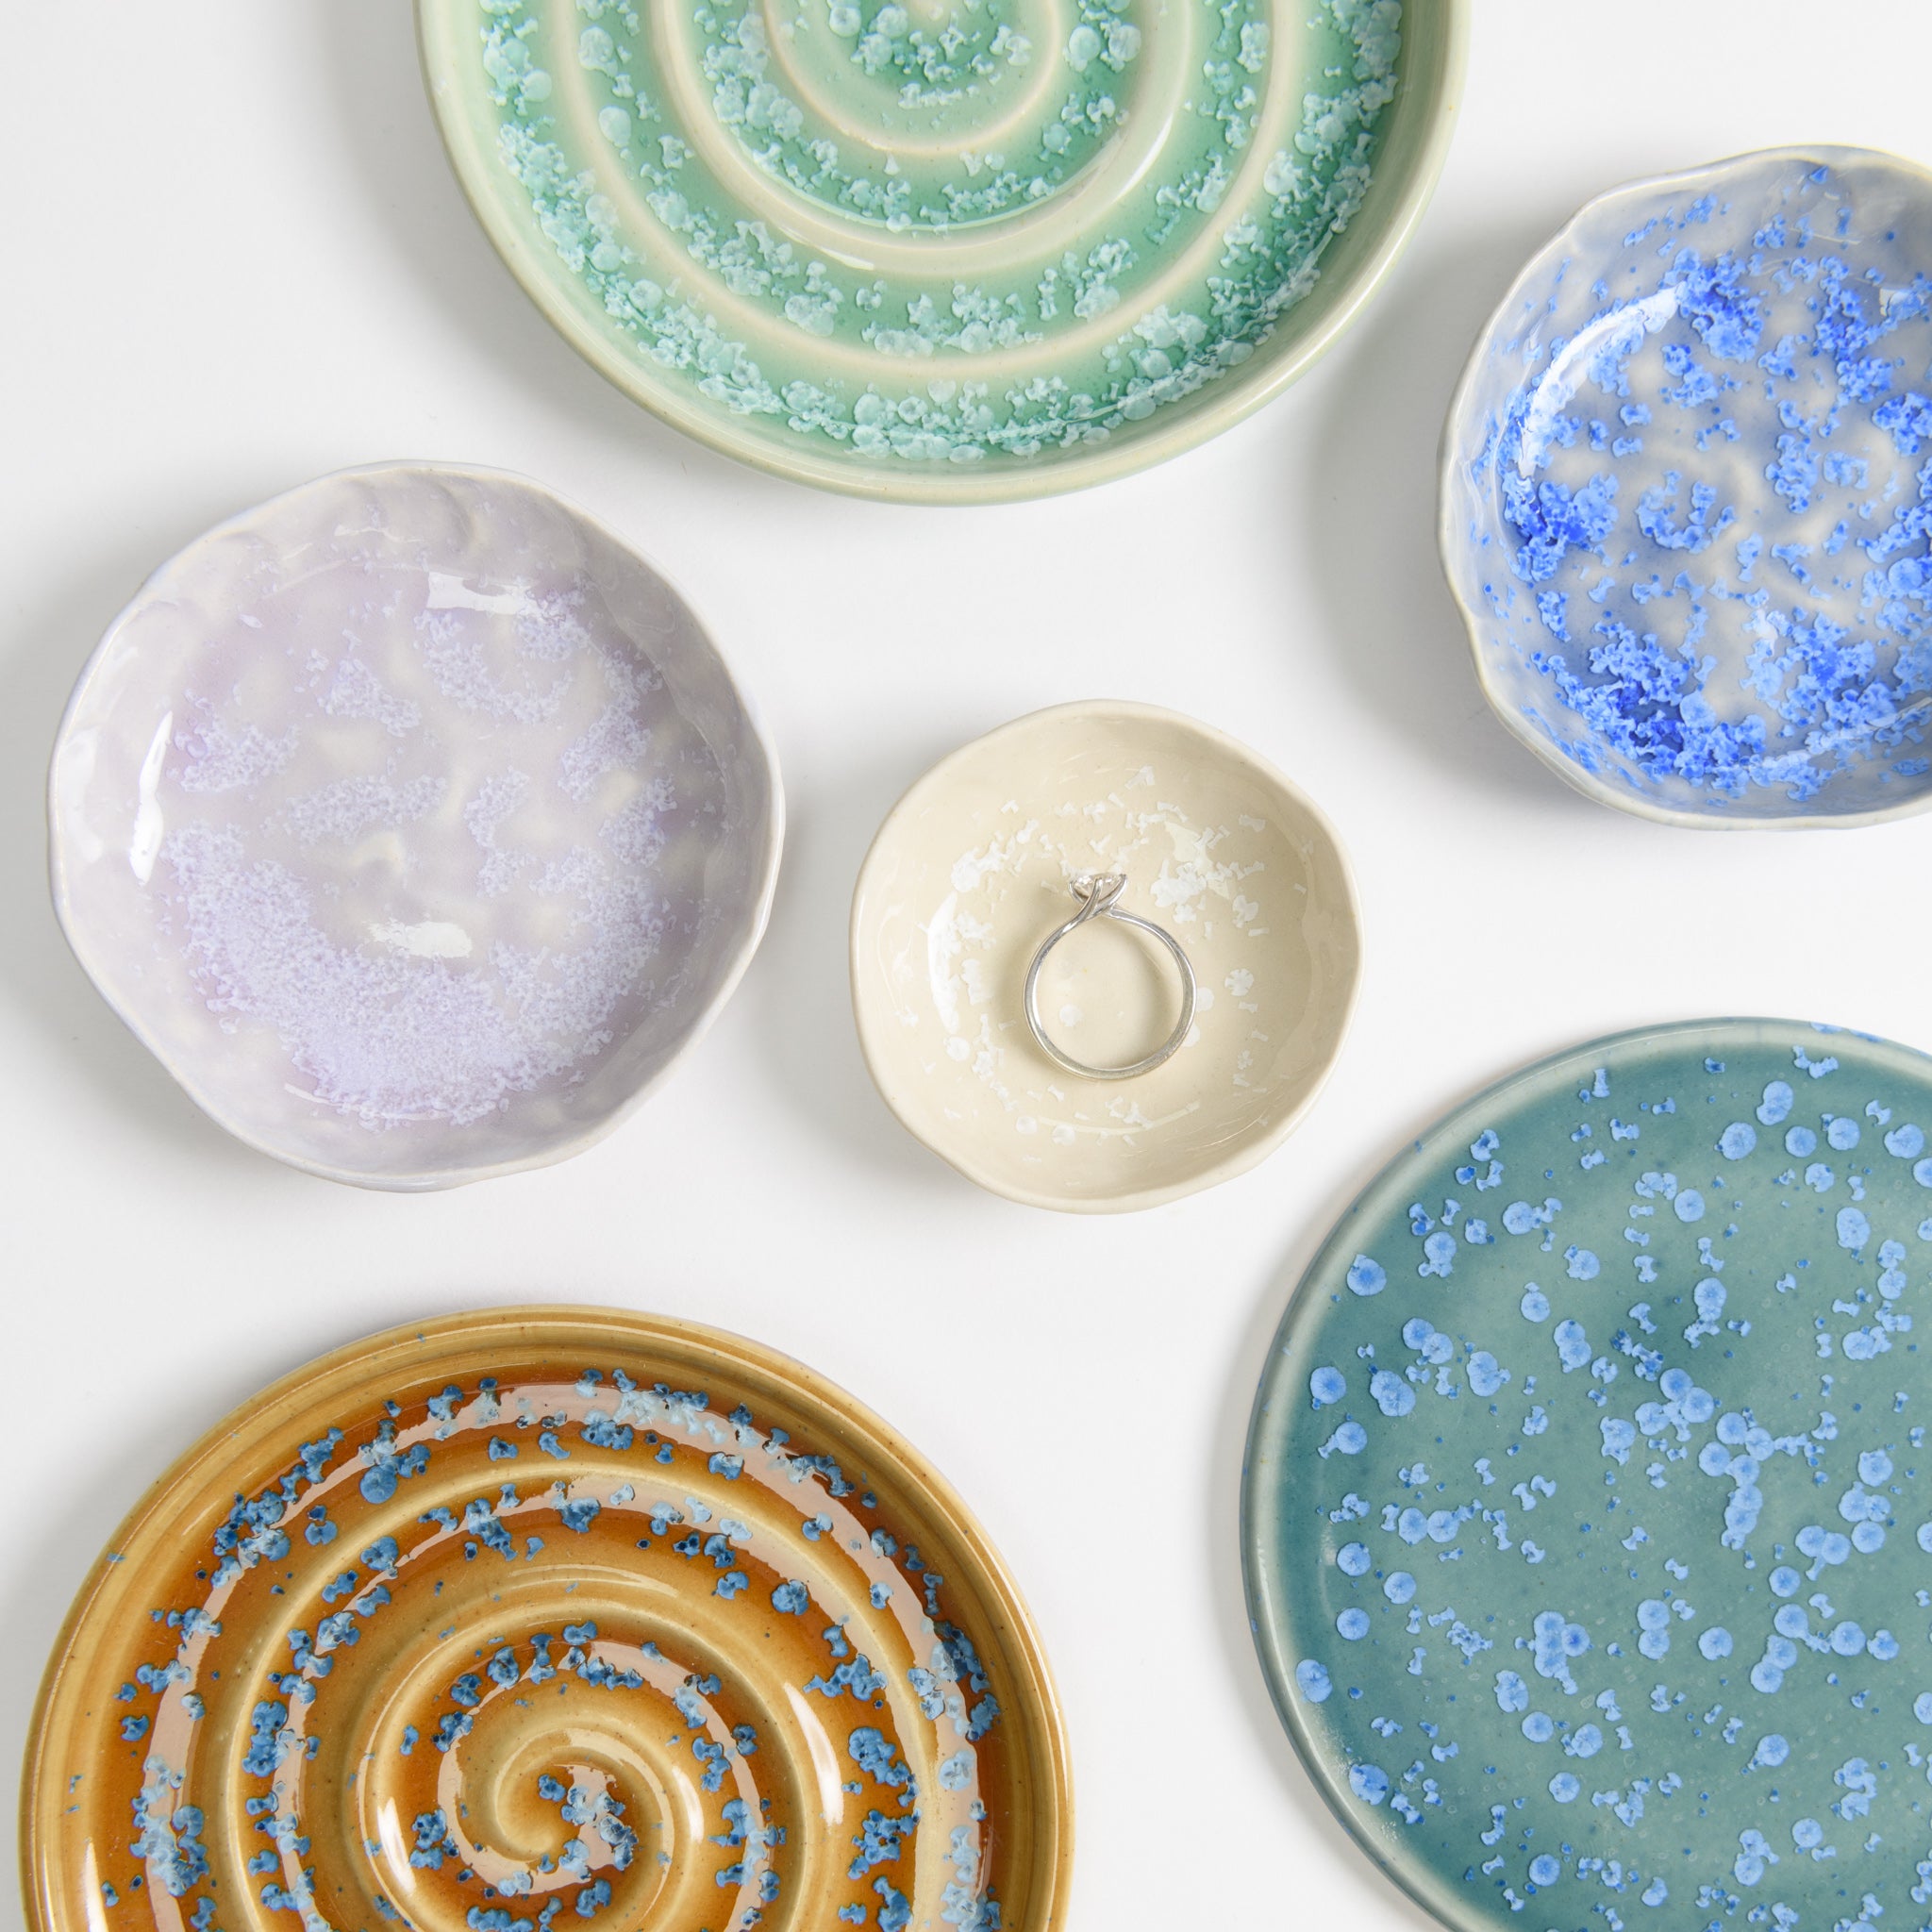 Handmade cute ceramic jewellery dishes, soap dishes and coasters